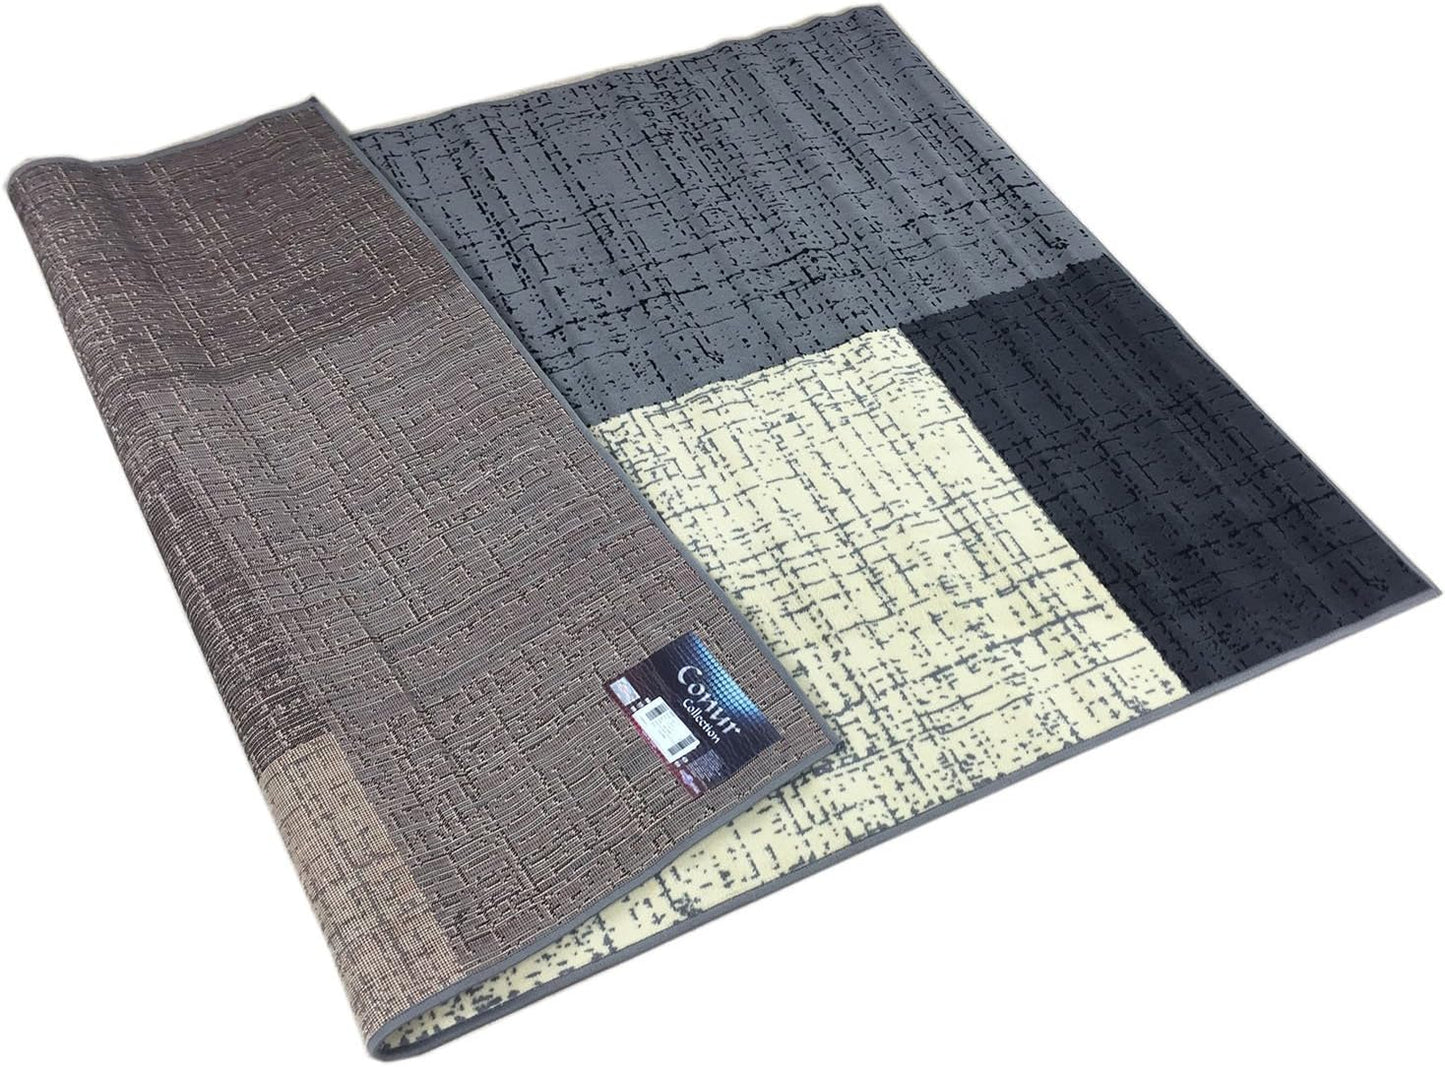 Conur Collection Squares Geometric Abstract Area Rug Rugs Modern Contemporary Area Rug 2 Color Options (Grey Black , 4'11" x 6'11")